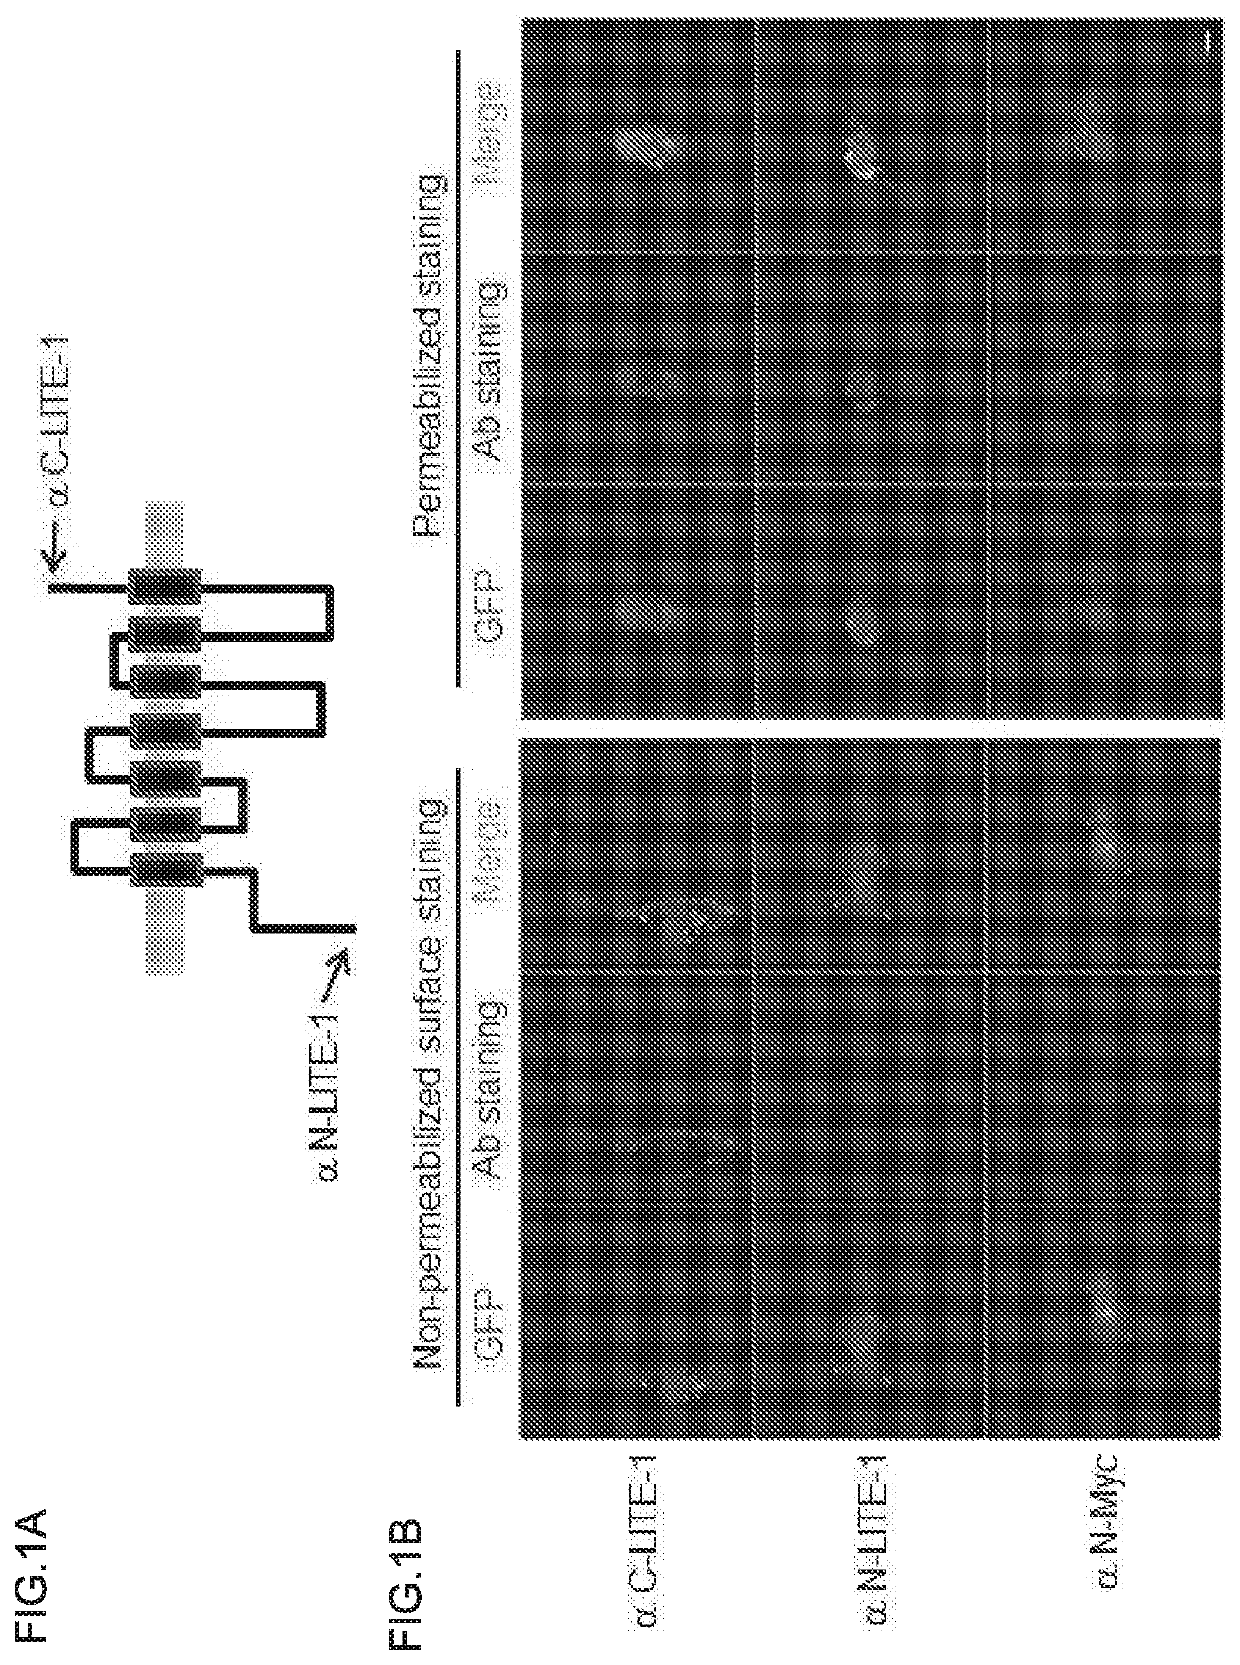 Compositions and methods for blocking ultraviolet radiation